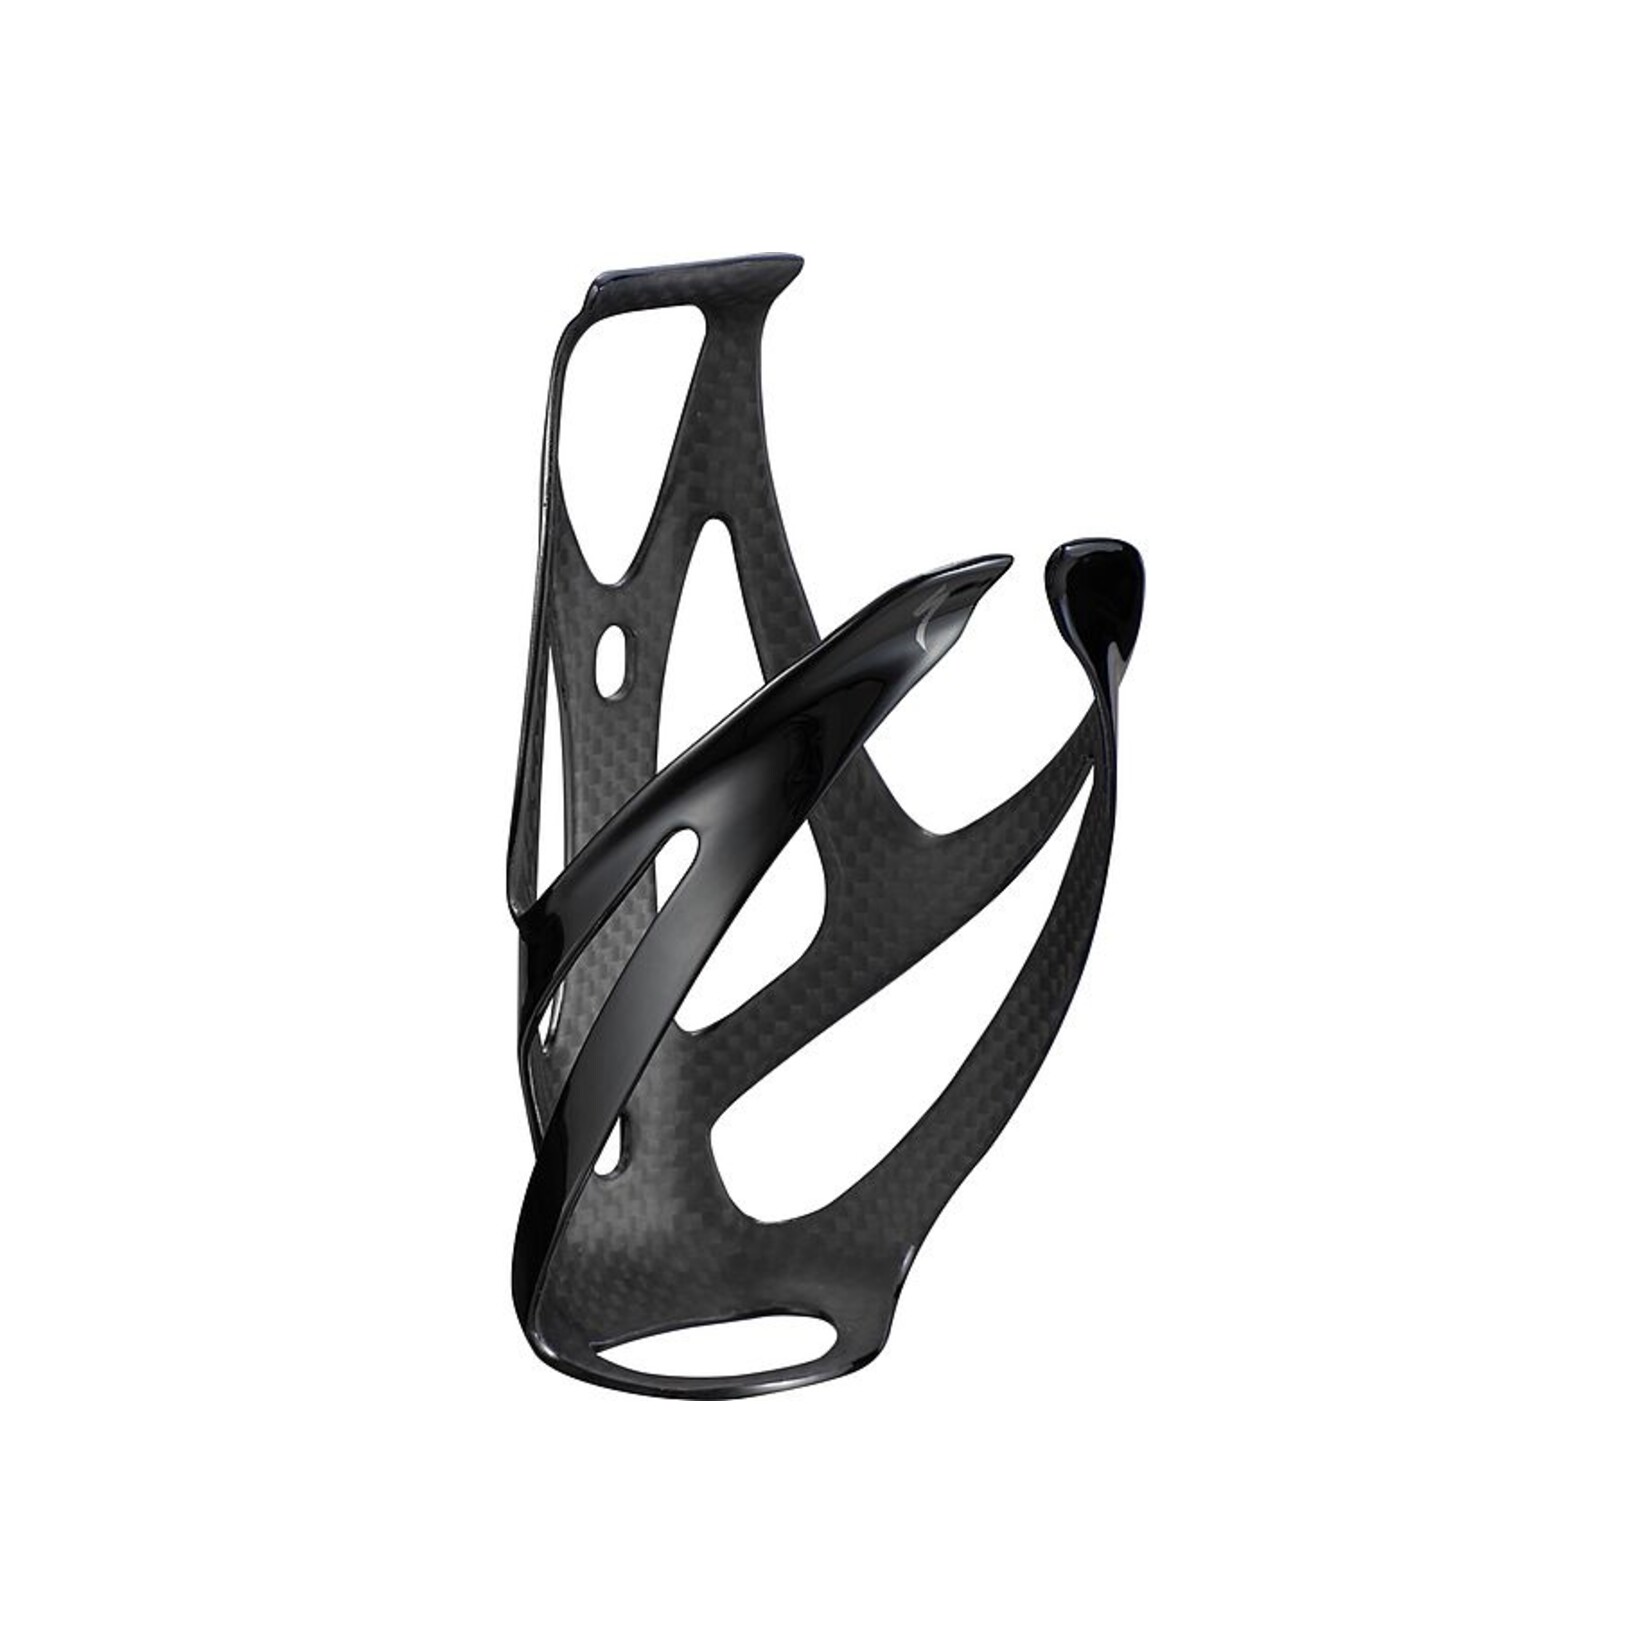 Specialized S-Works Carbon Rib Cage III in Carbon/Gloss Black